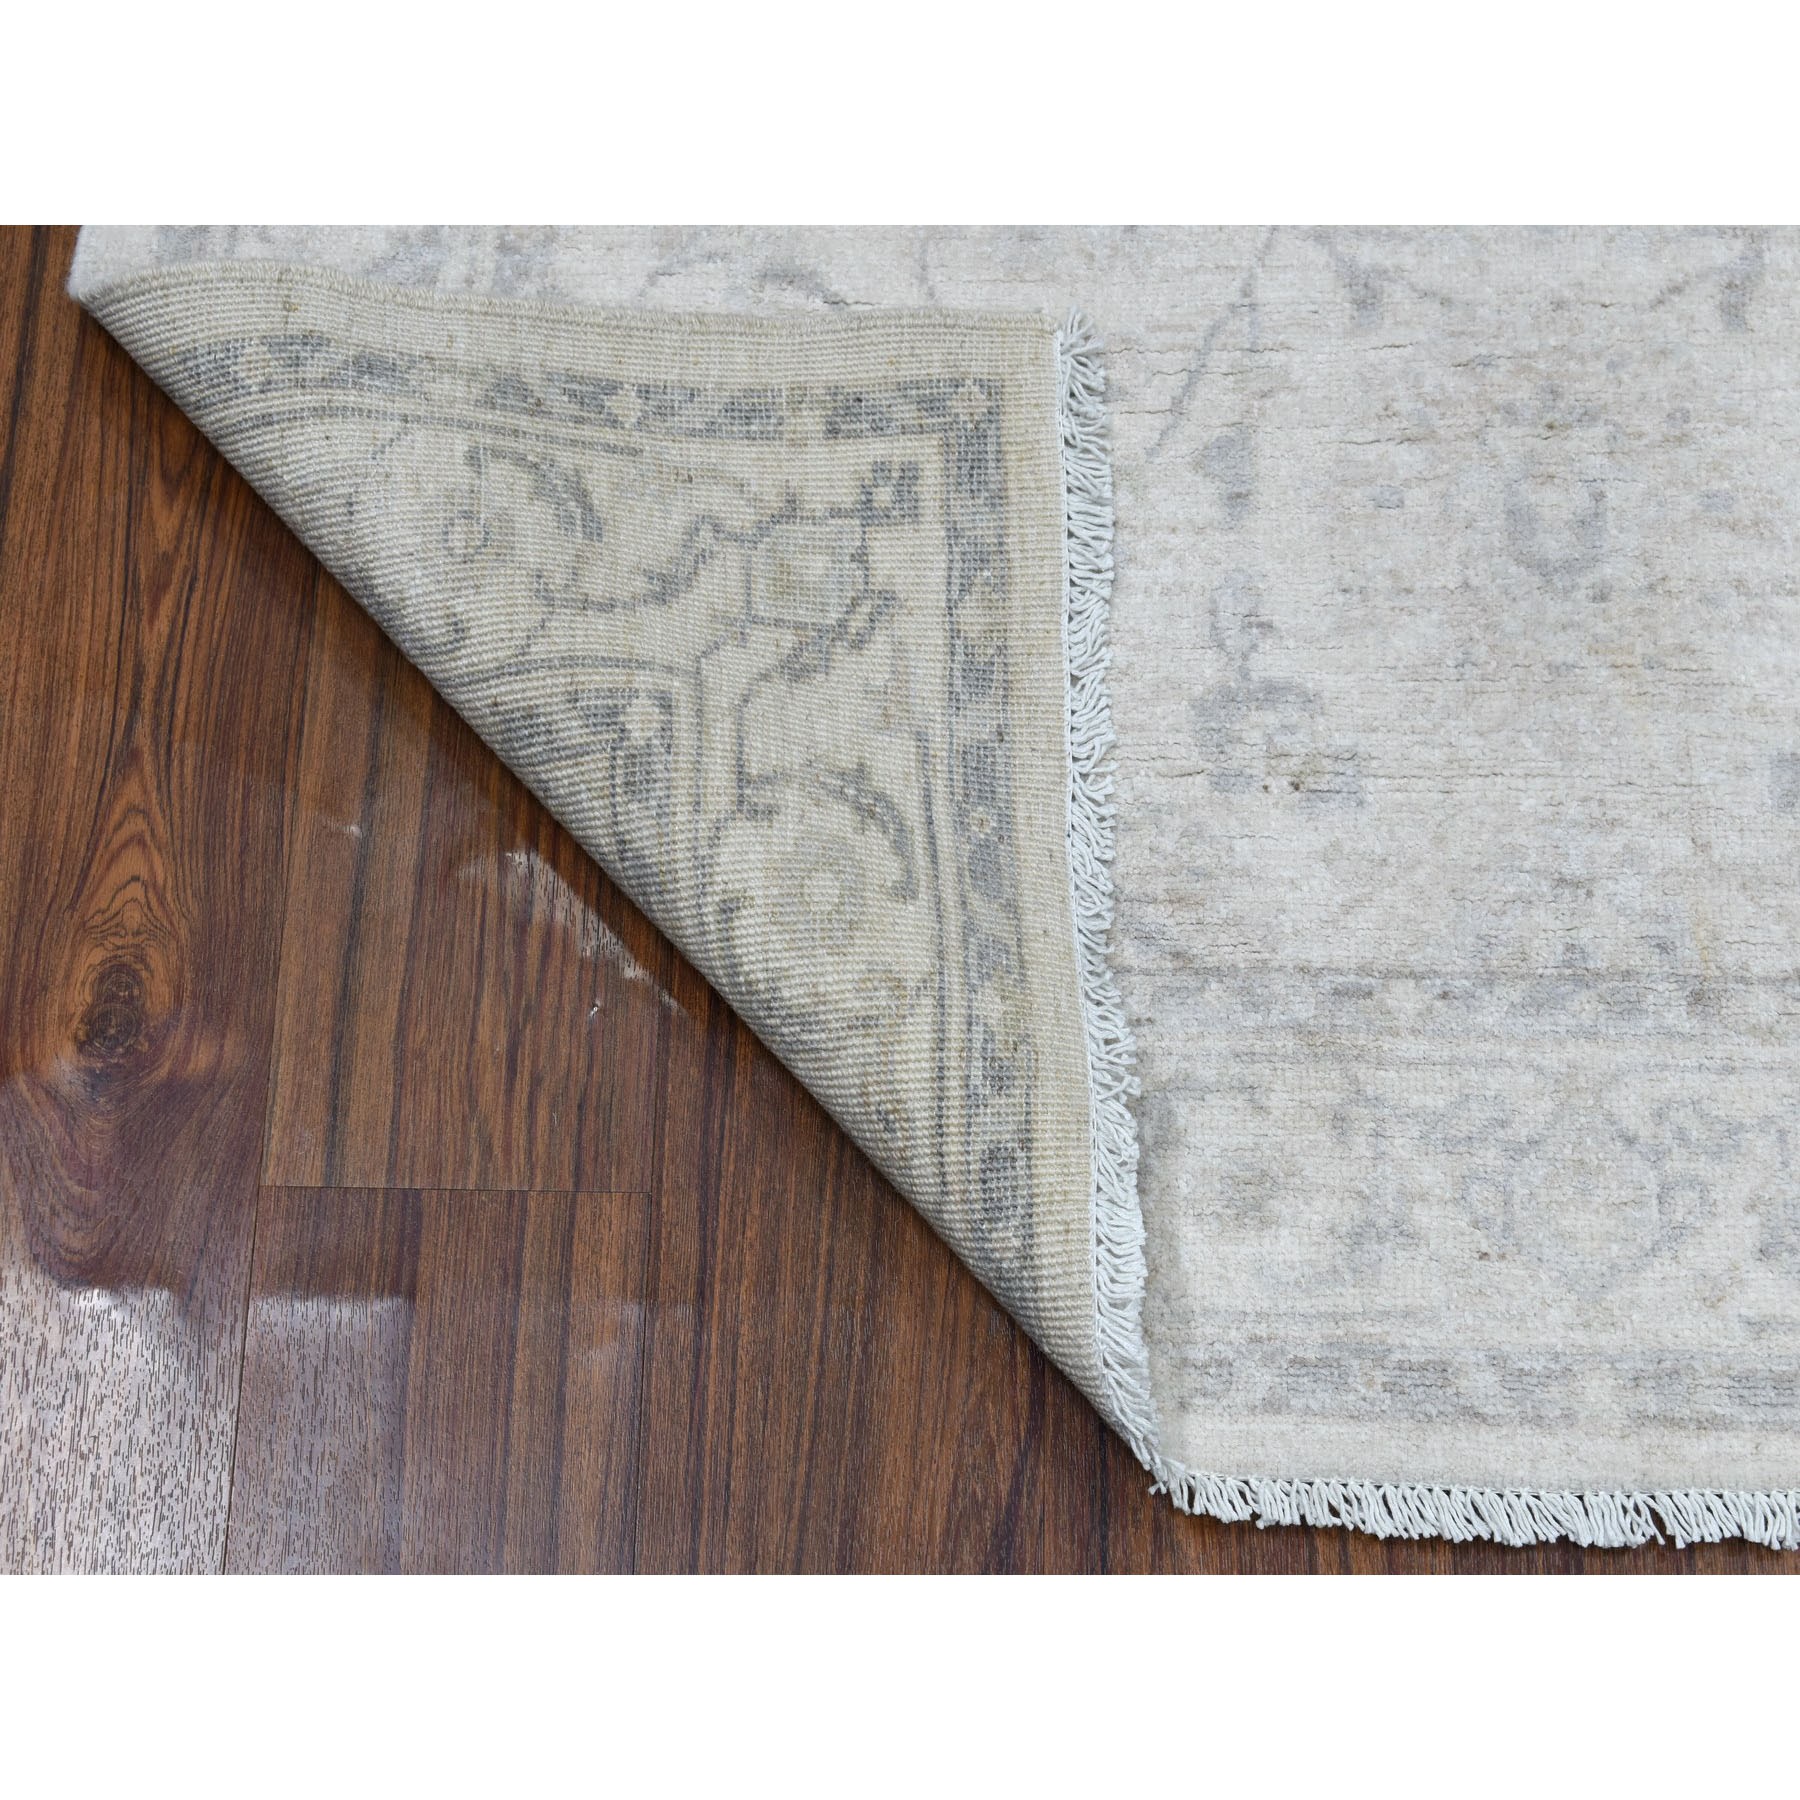 4-2 x6- White Wash Peshawar Mahal Design Pure Wool Hand Knotted Oriental Rug 